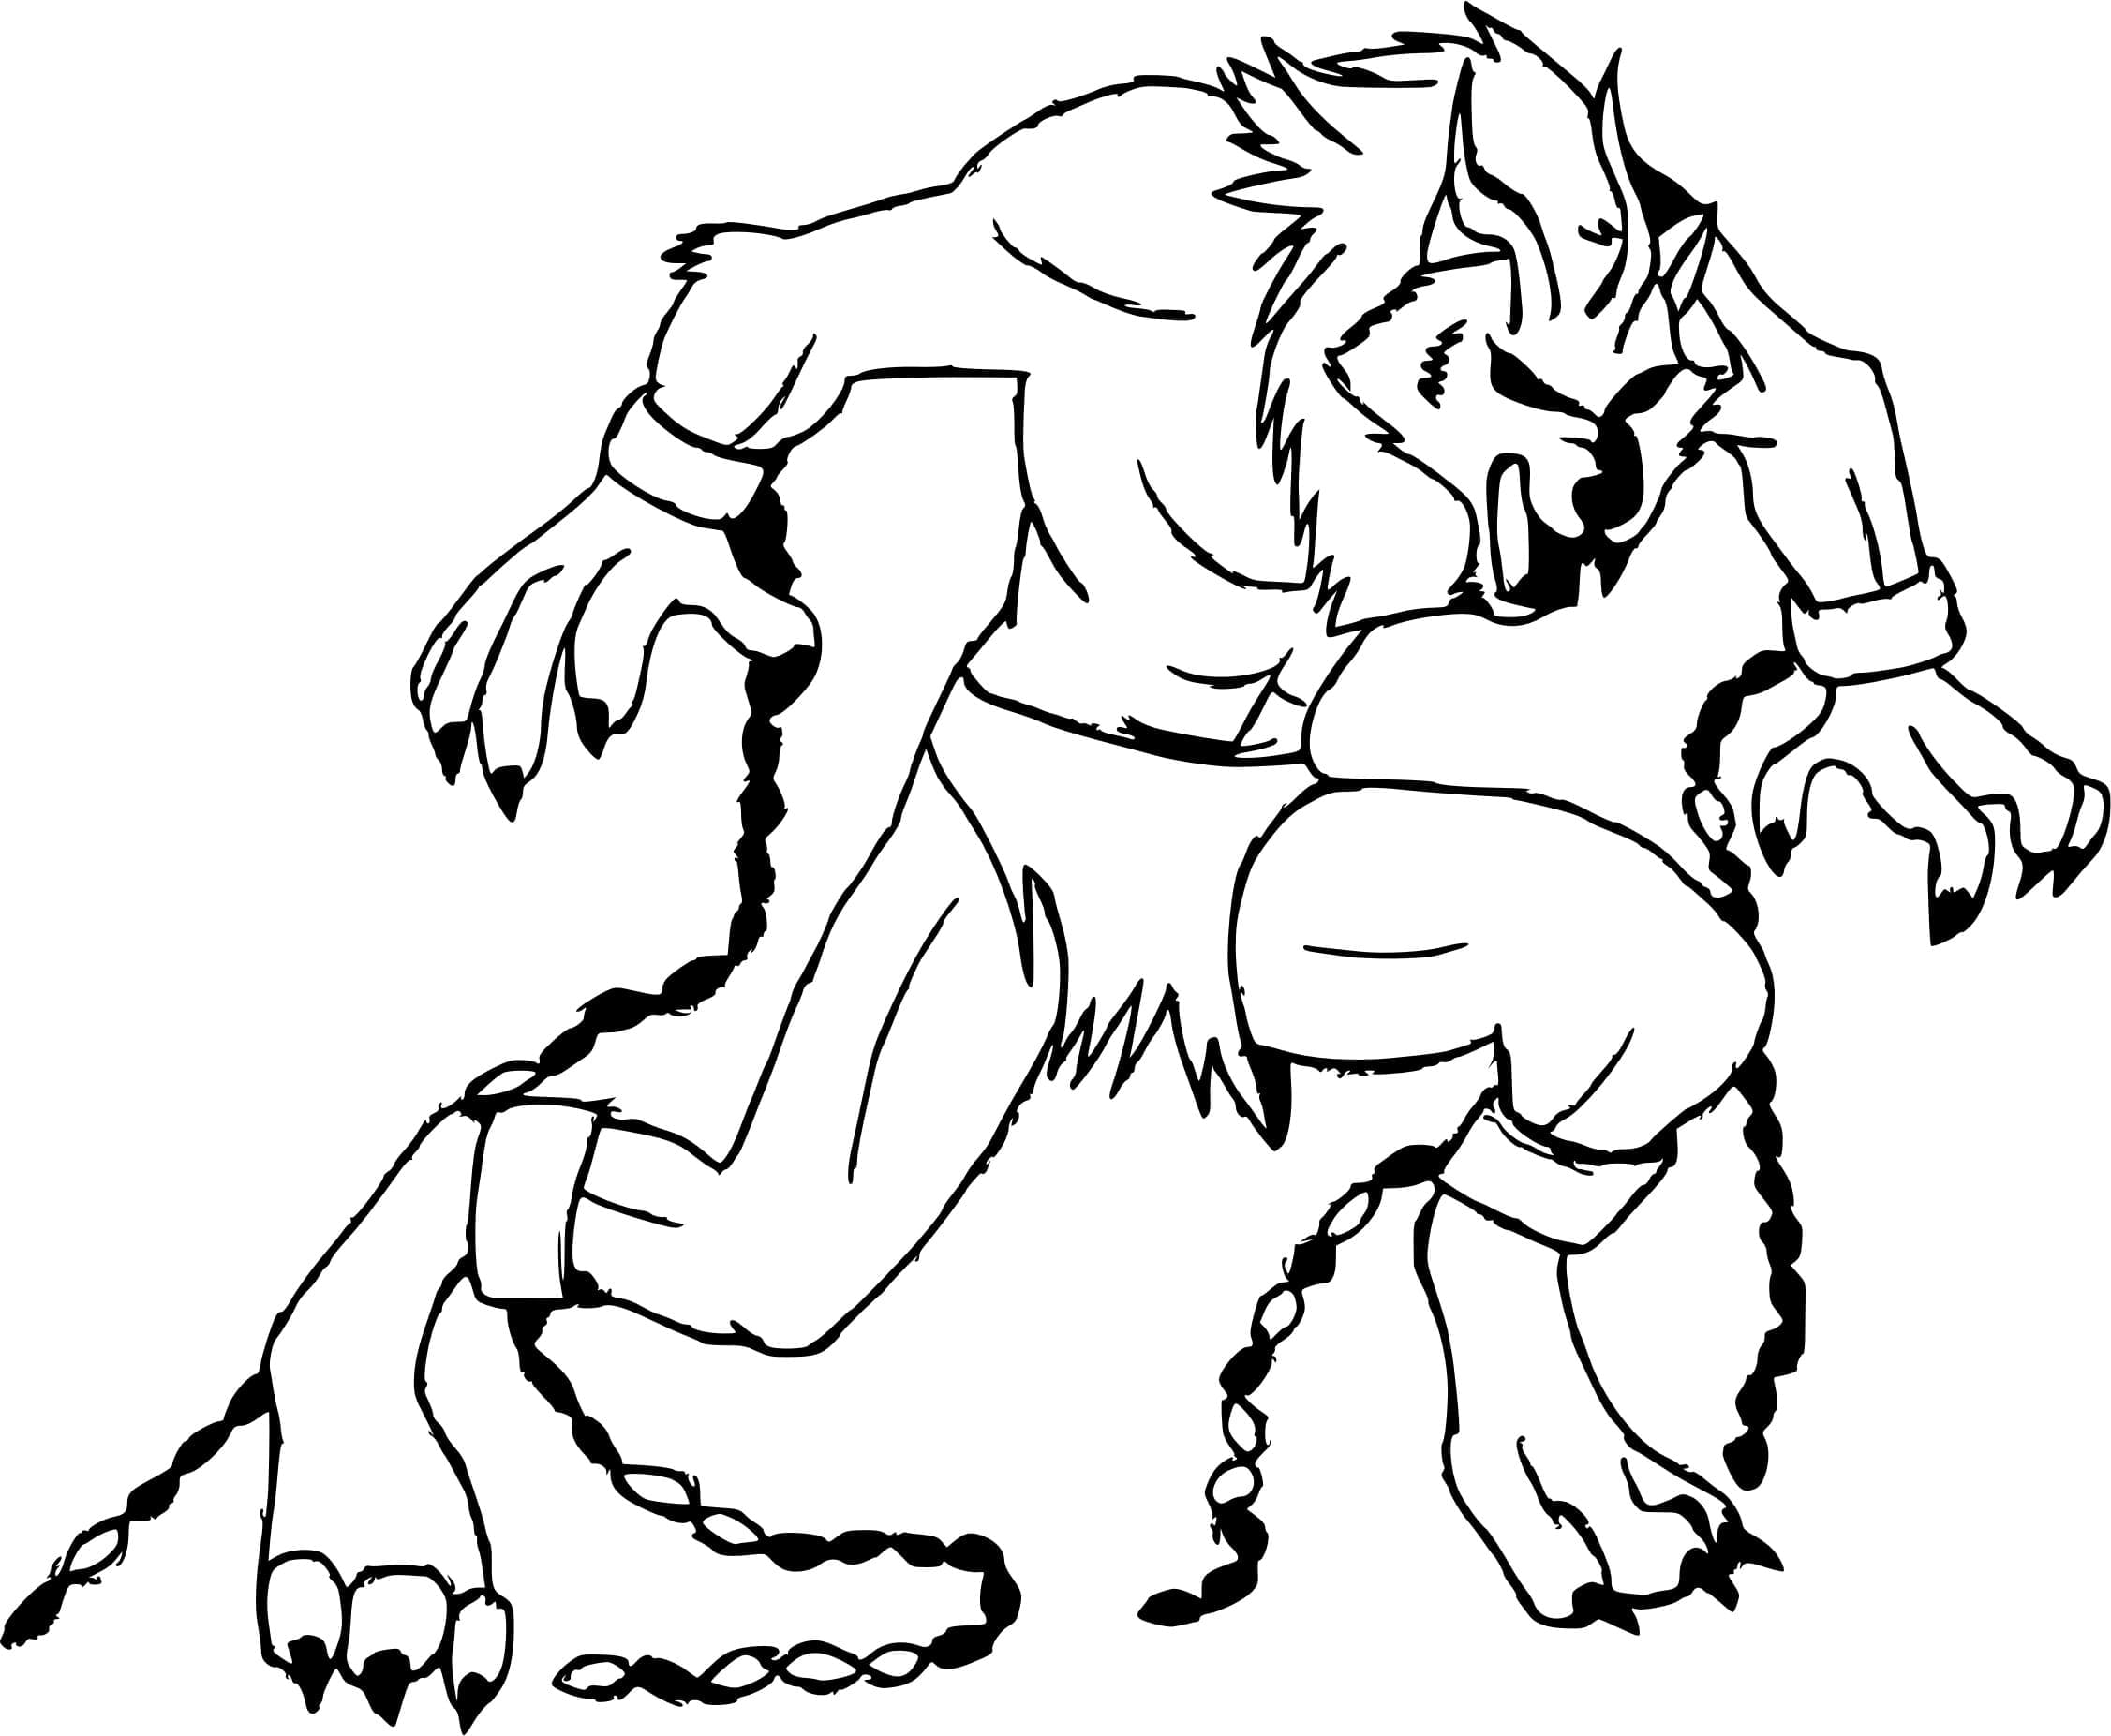 A werewolf coloring page